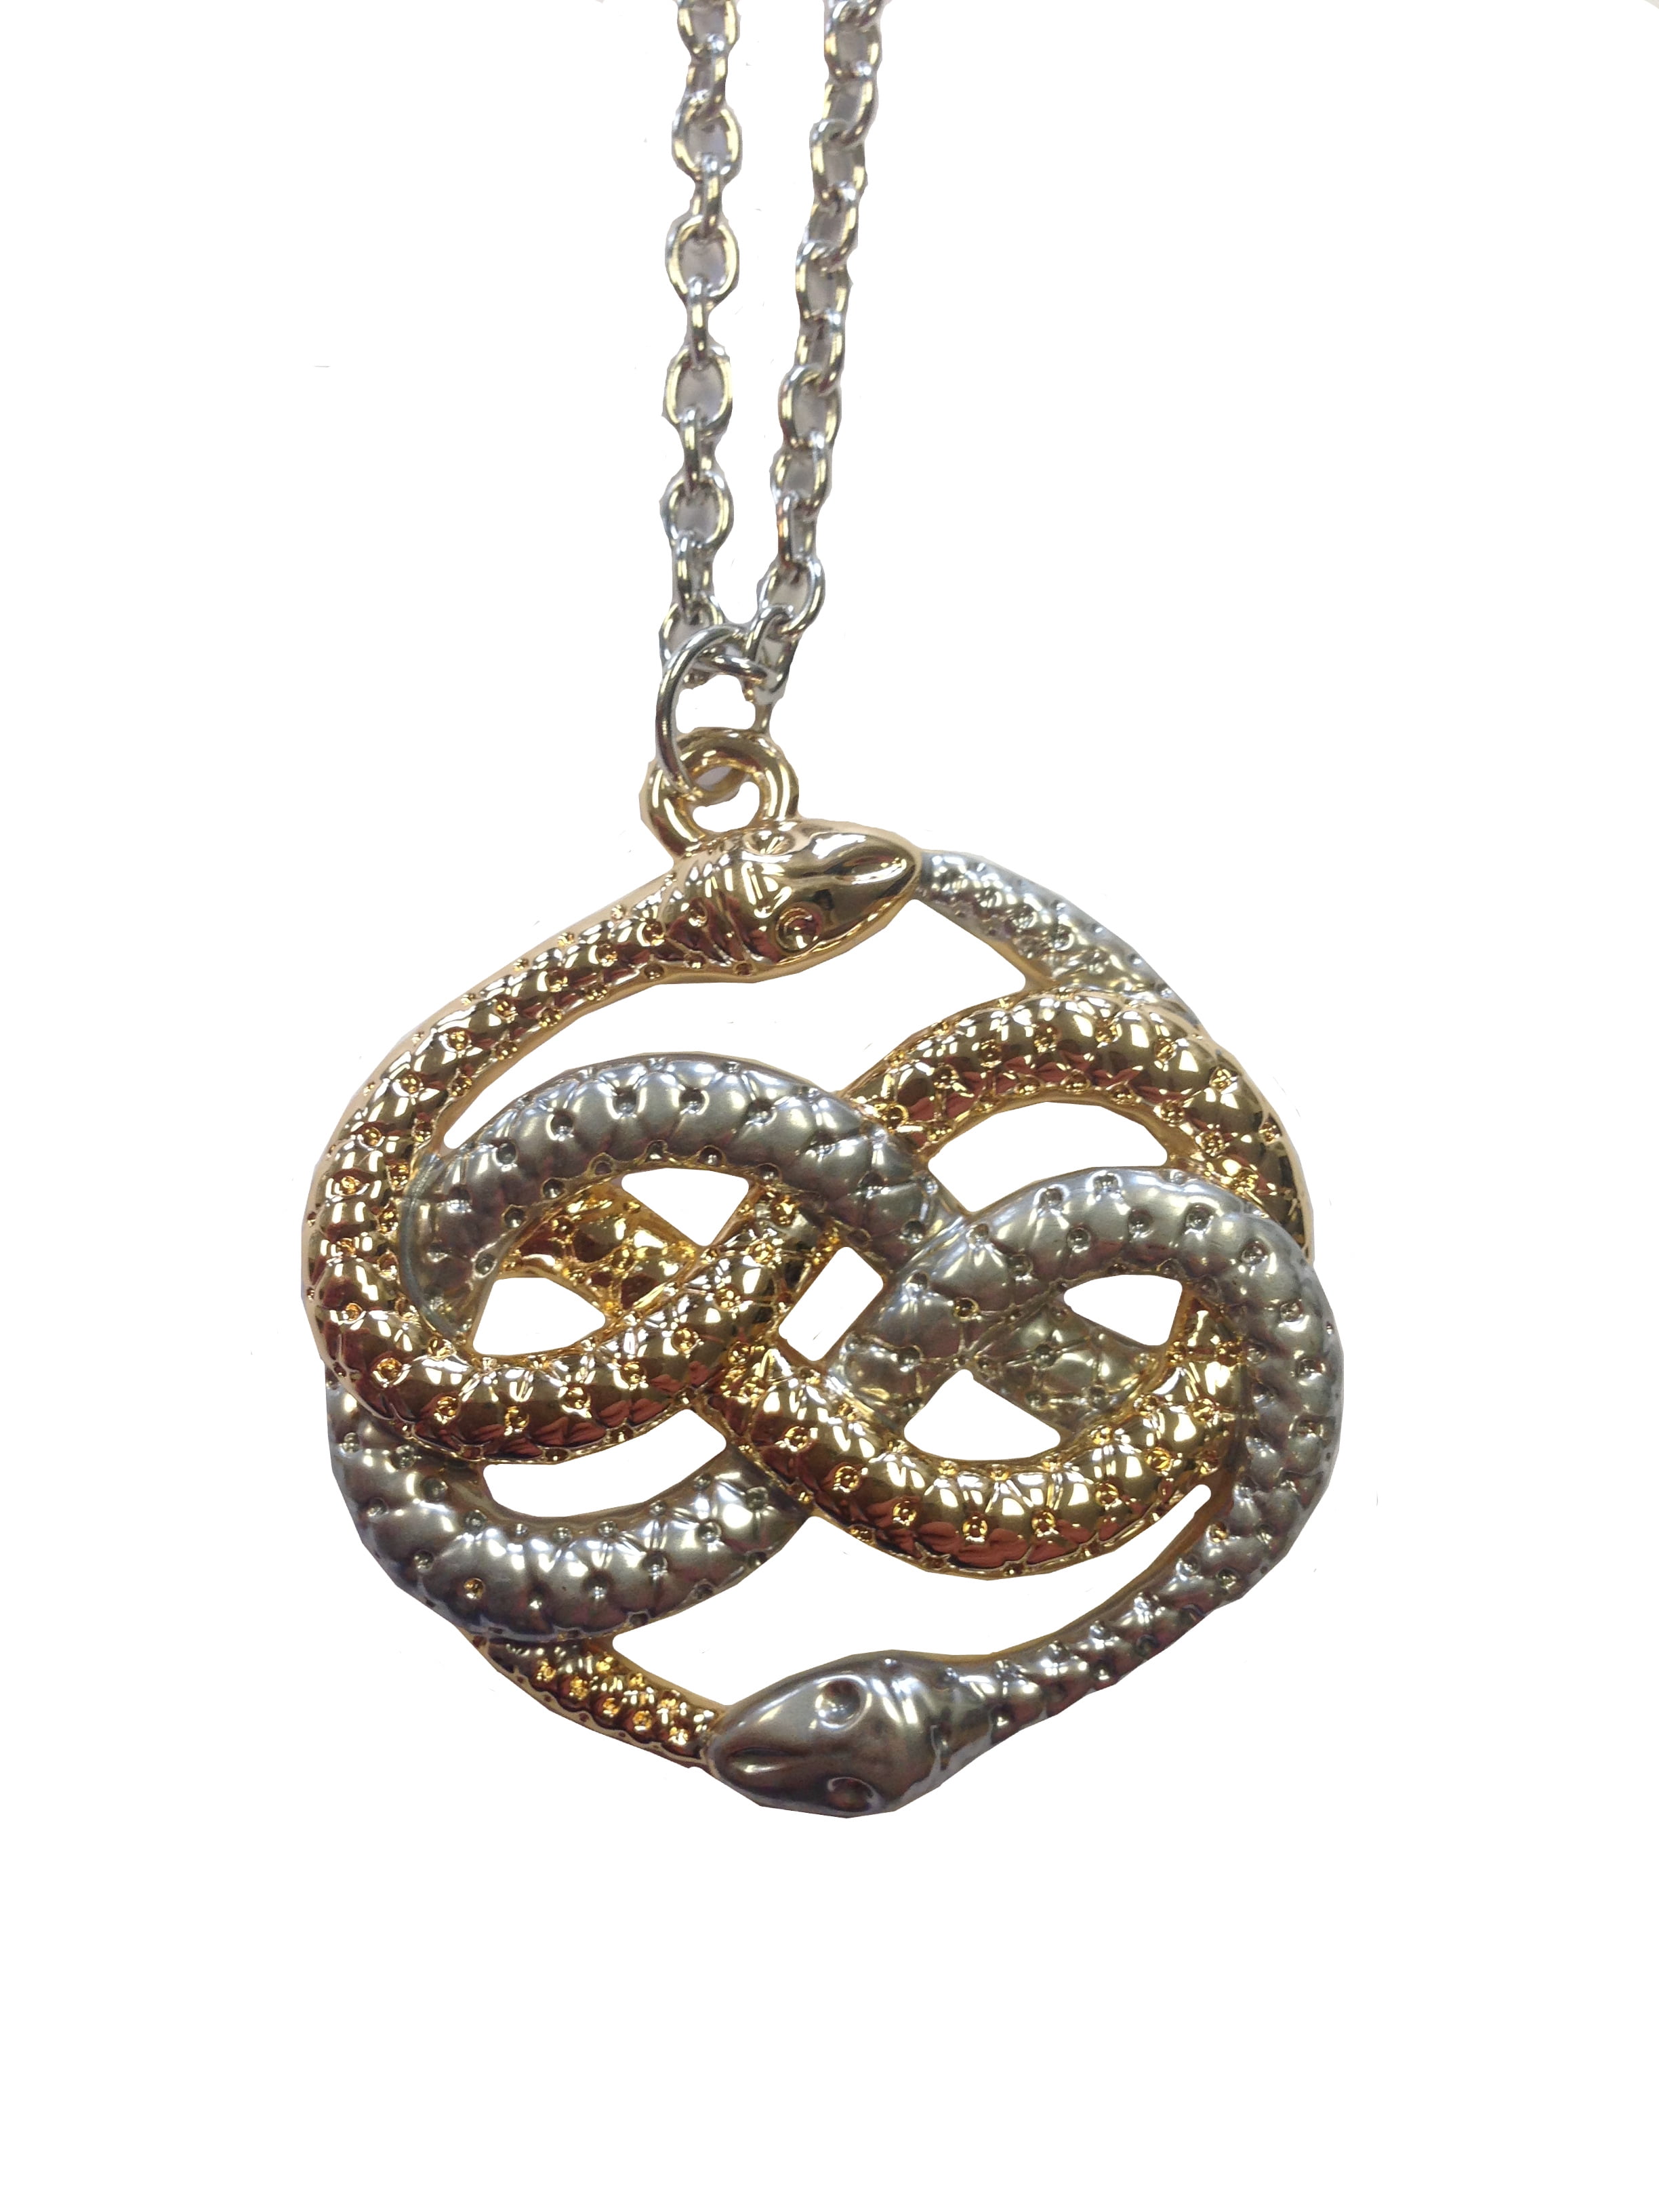 Neverending Story Inspired Necklace, Neverending Auryn Necklace, Auryn  Necklace, Neverending Story Inspired Necklace, Auryn Snake Necklace - Etsy  | Necklace, Necklace etsy, Etsy jewelry